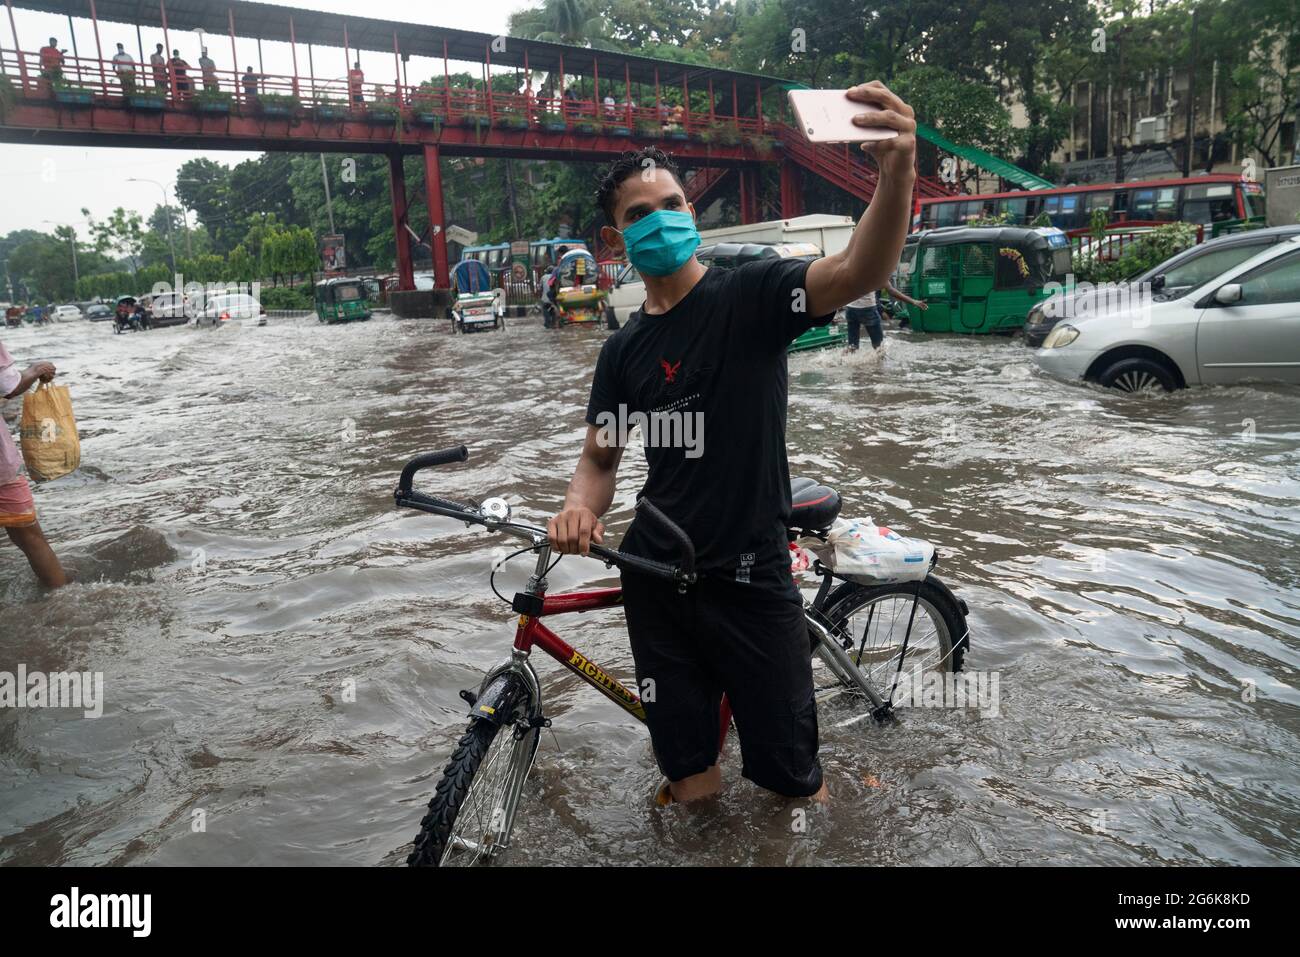 A man takes selfies in rain water on the streets during the monsoon rain. Couple of hours of rain create waterlogging on the streets as the sewerage and drains system is not cleared and maintained properly. Dhaka, Bangladesh. Stock Photo